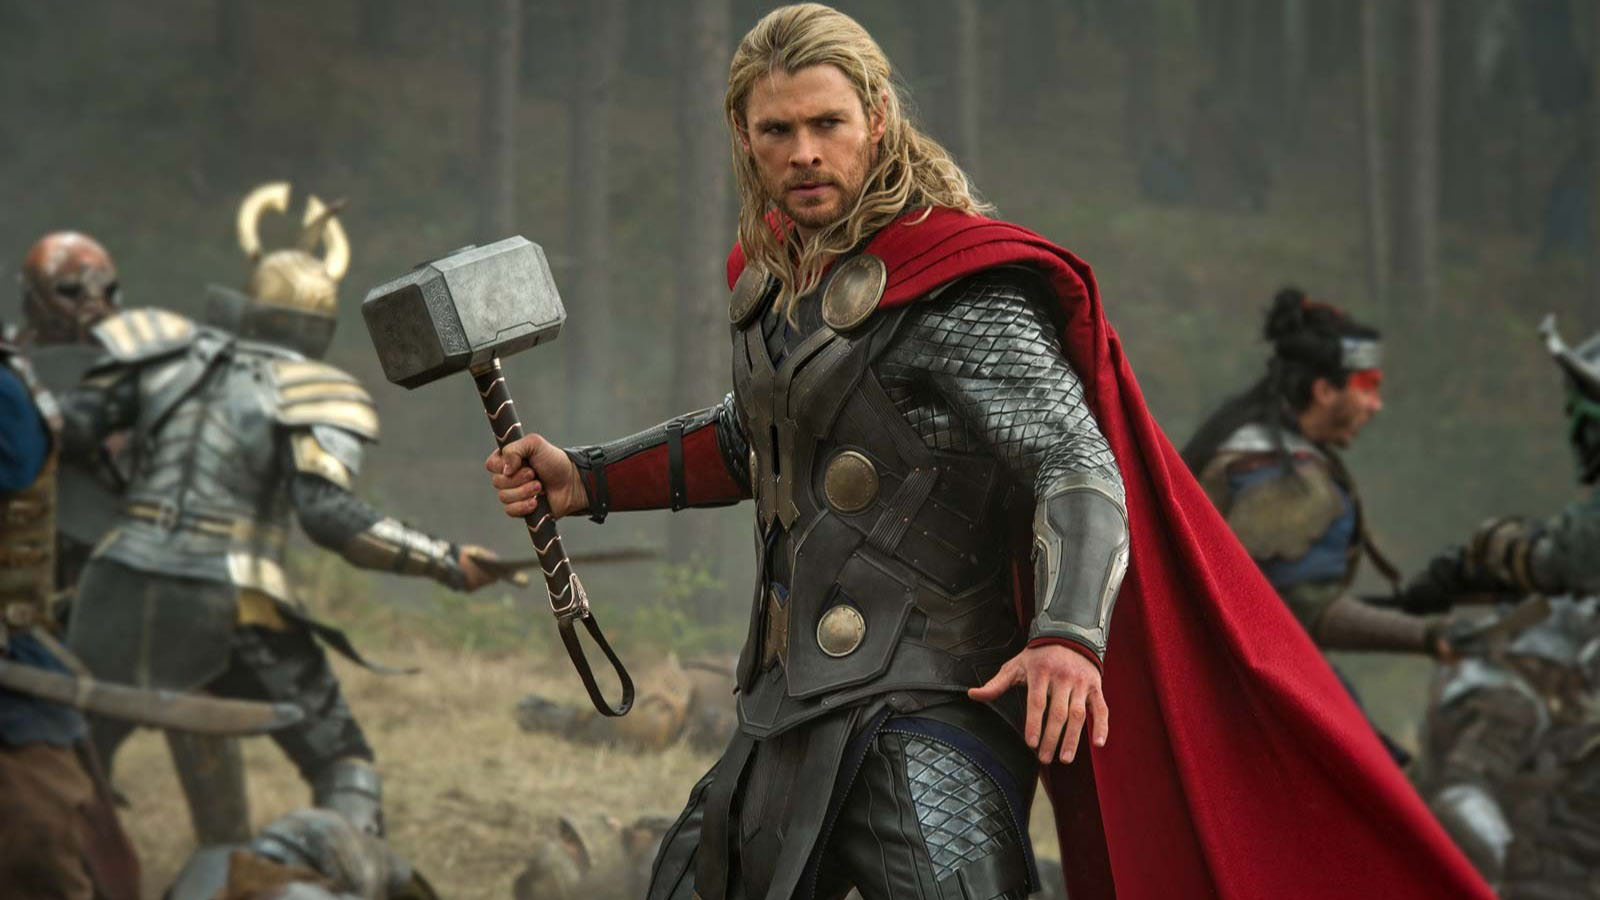 Thor Odinson is a fictional character and superhero appearing in American comic books published by Marvel Comics. The character, which is based on the...